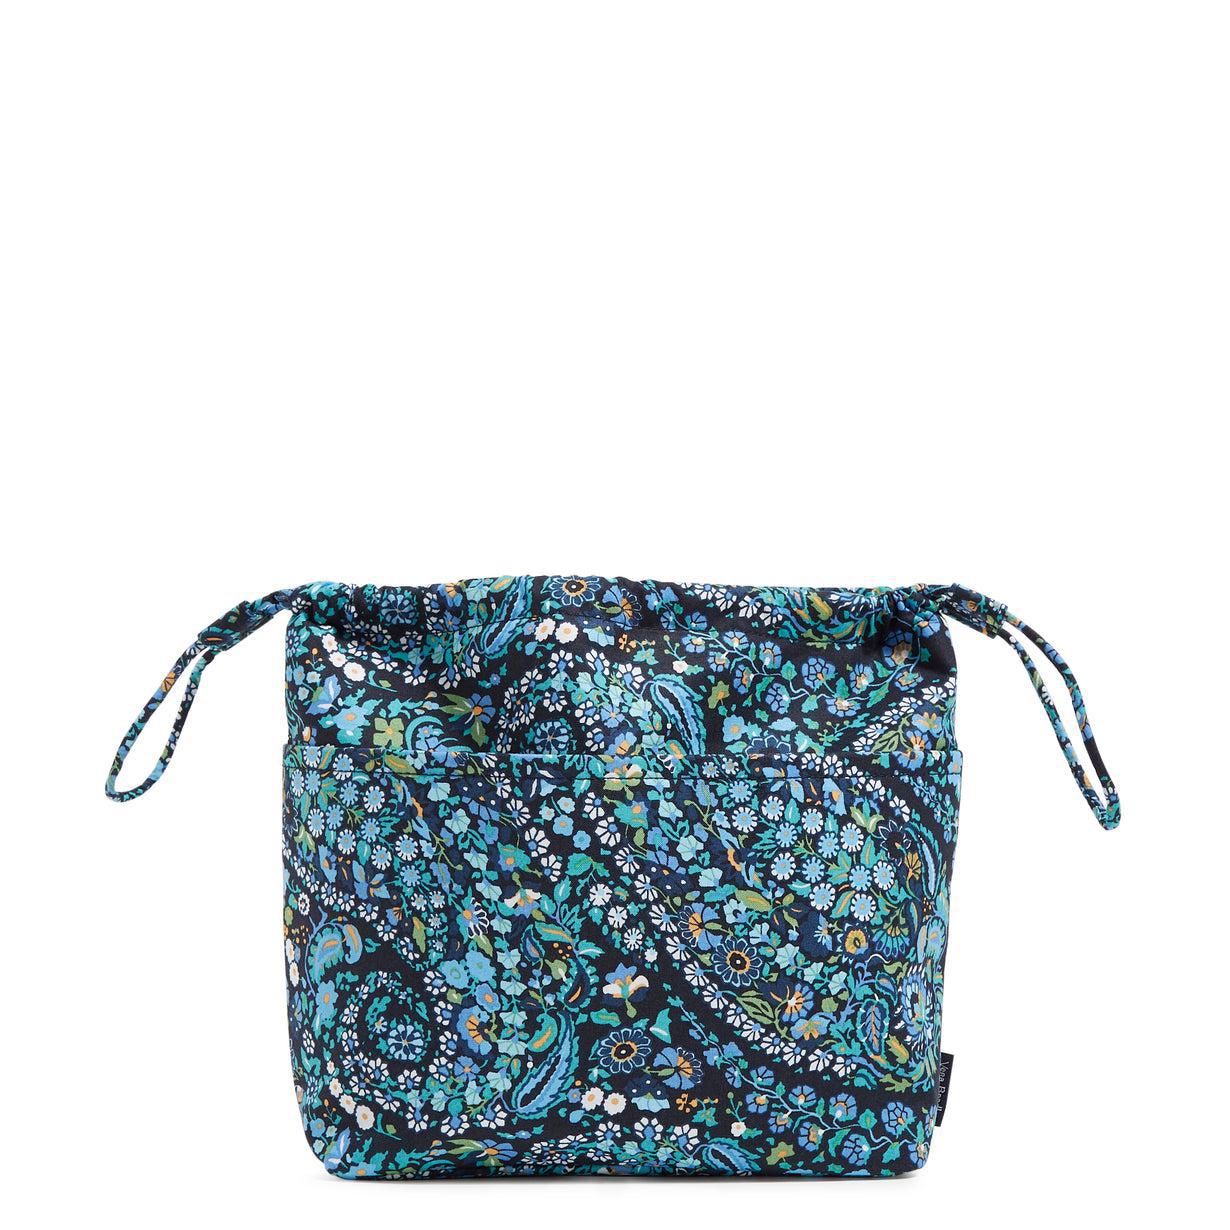 Ditty Bag In Dreamer Paisley